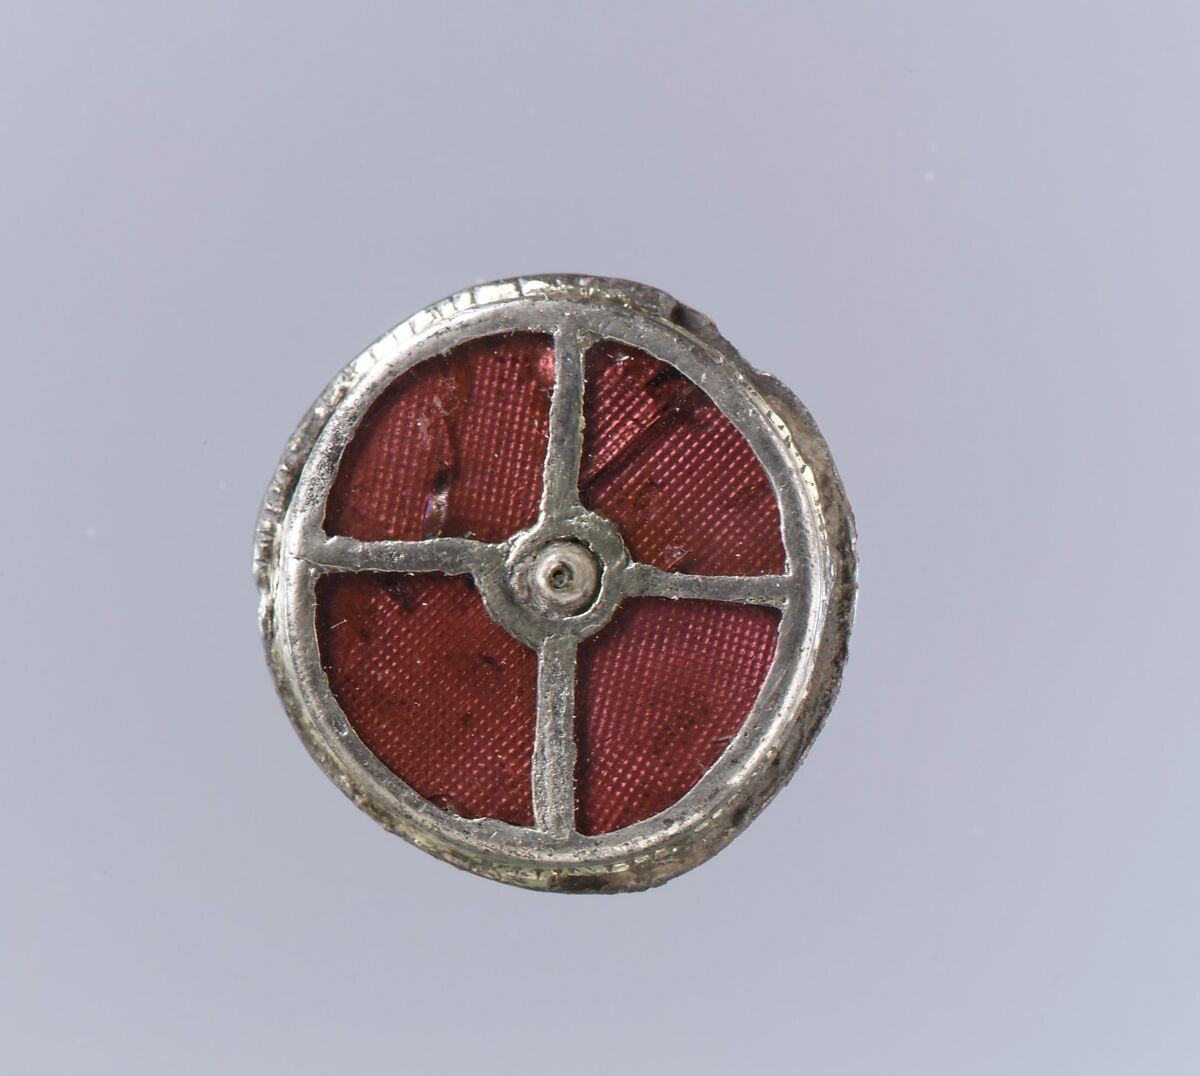 Disk Brooch, Silver-gilt, garnets with patterned foil backings, pearl;…, Frankish 